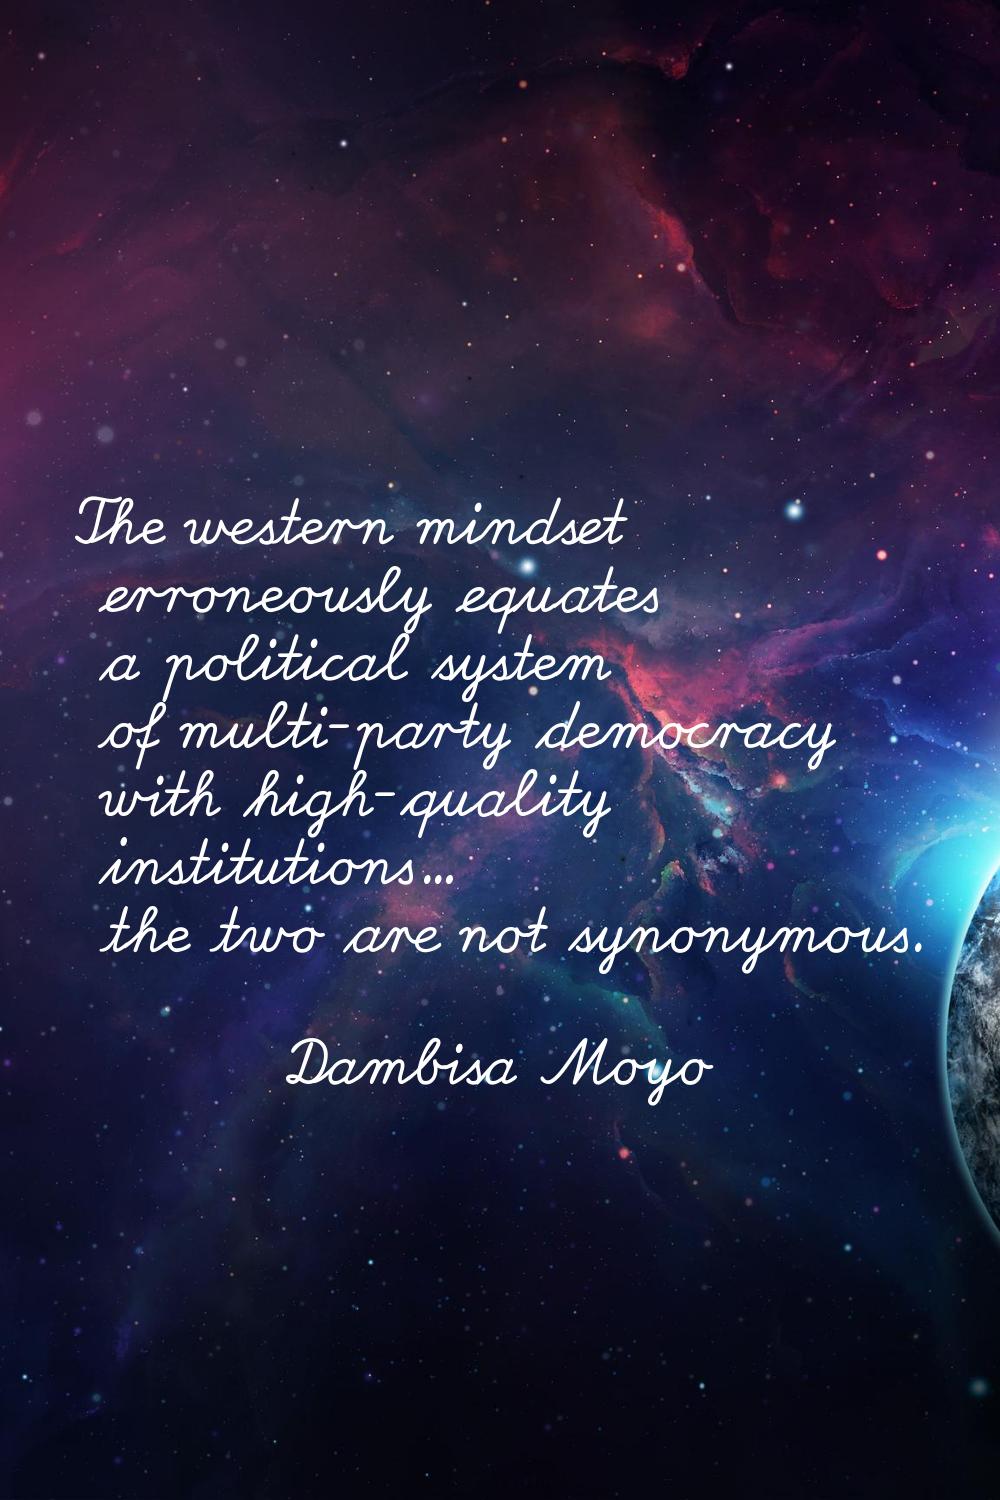 The western mindset erroneously equates a political system of multi-party democracy with high-quali